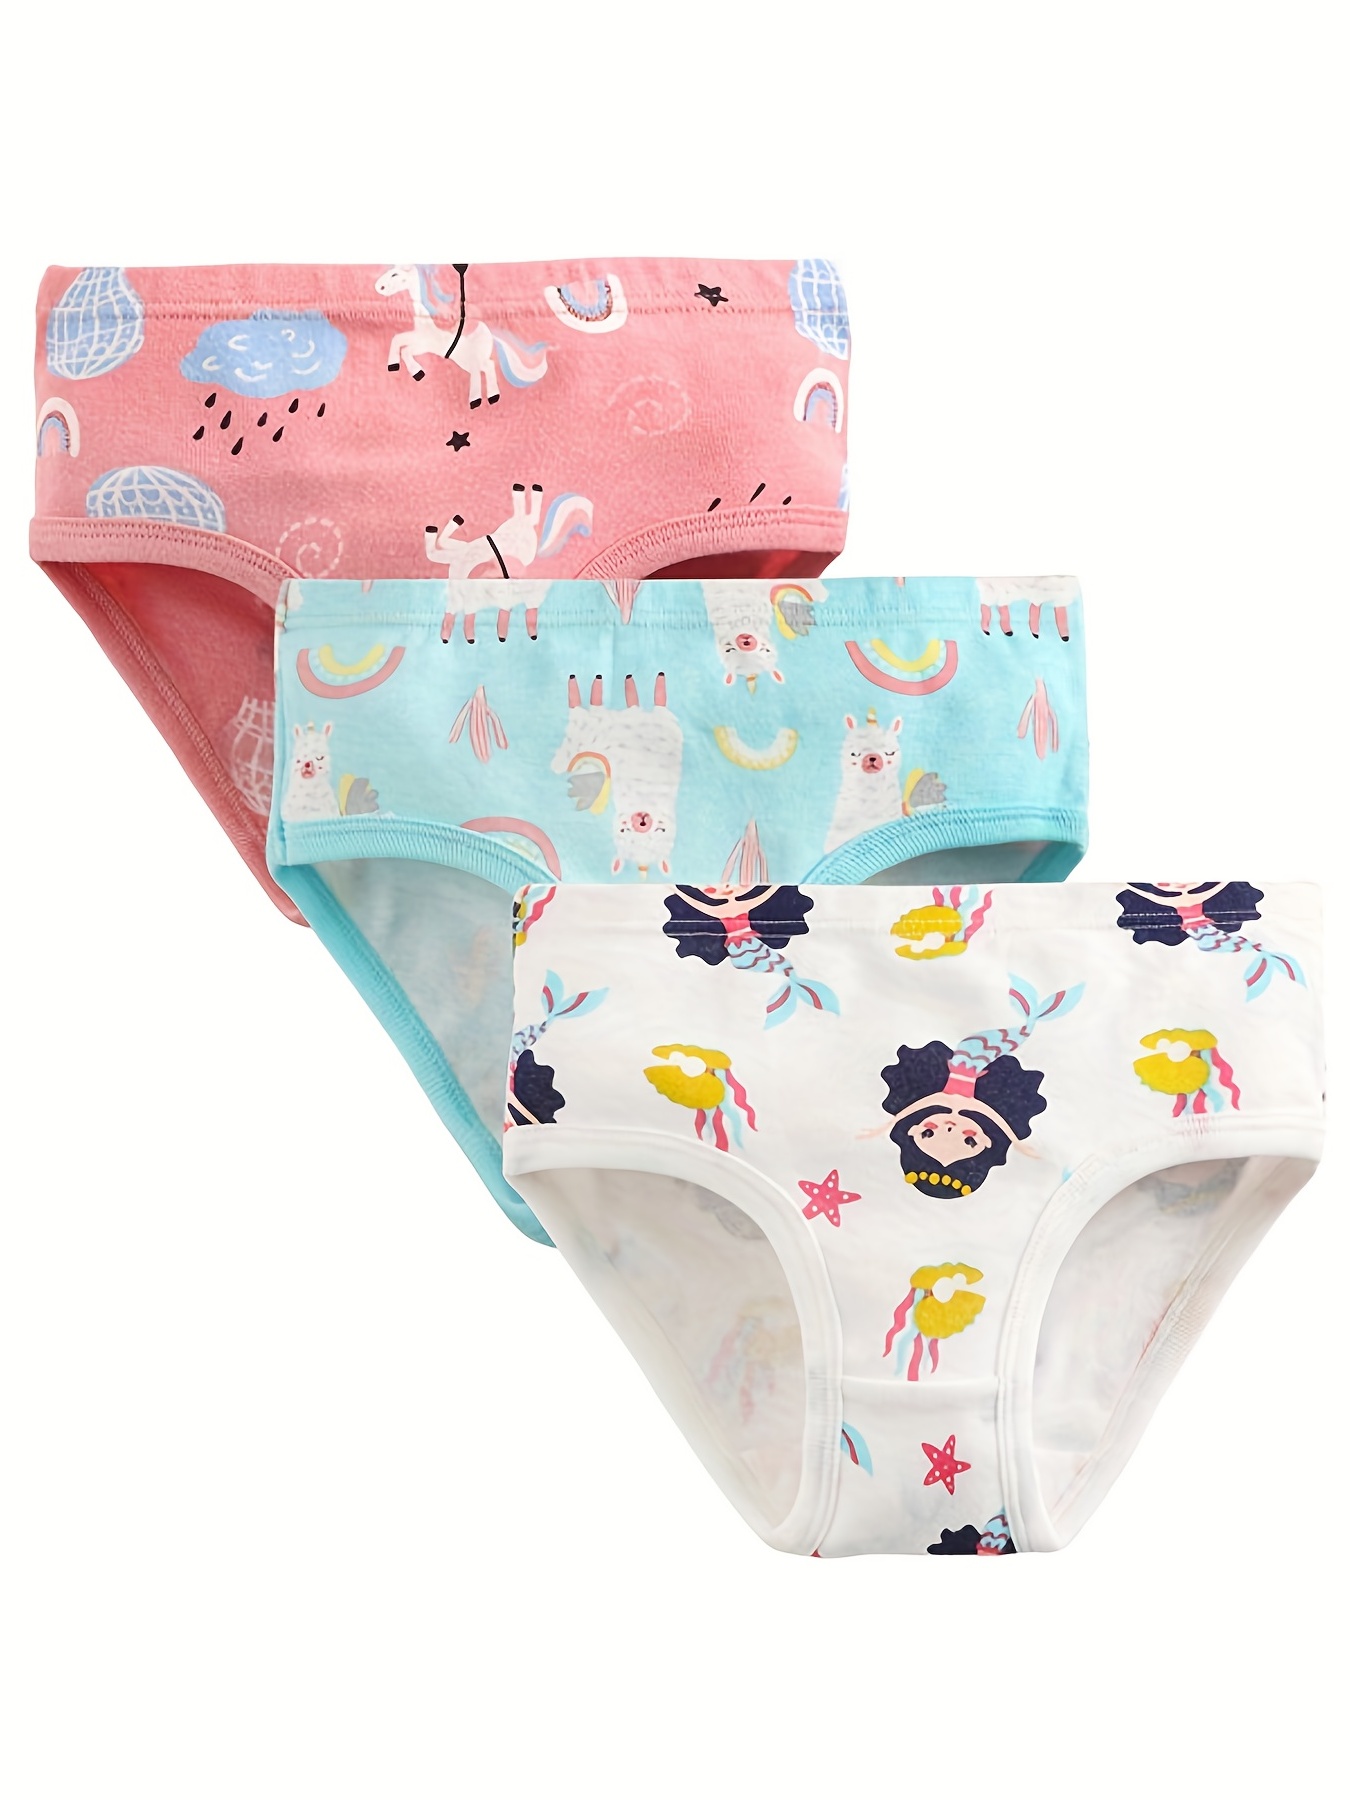 6pcs/lot Baby Kids Girl Panties Casual Simple Cartoon Printed Triangle  Underwear Clothes 4-5 Years Old 